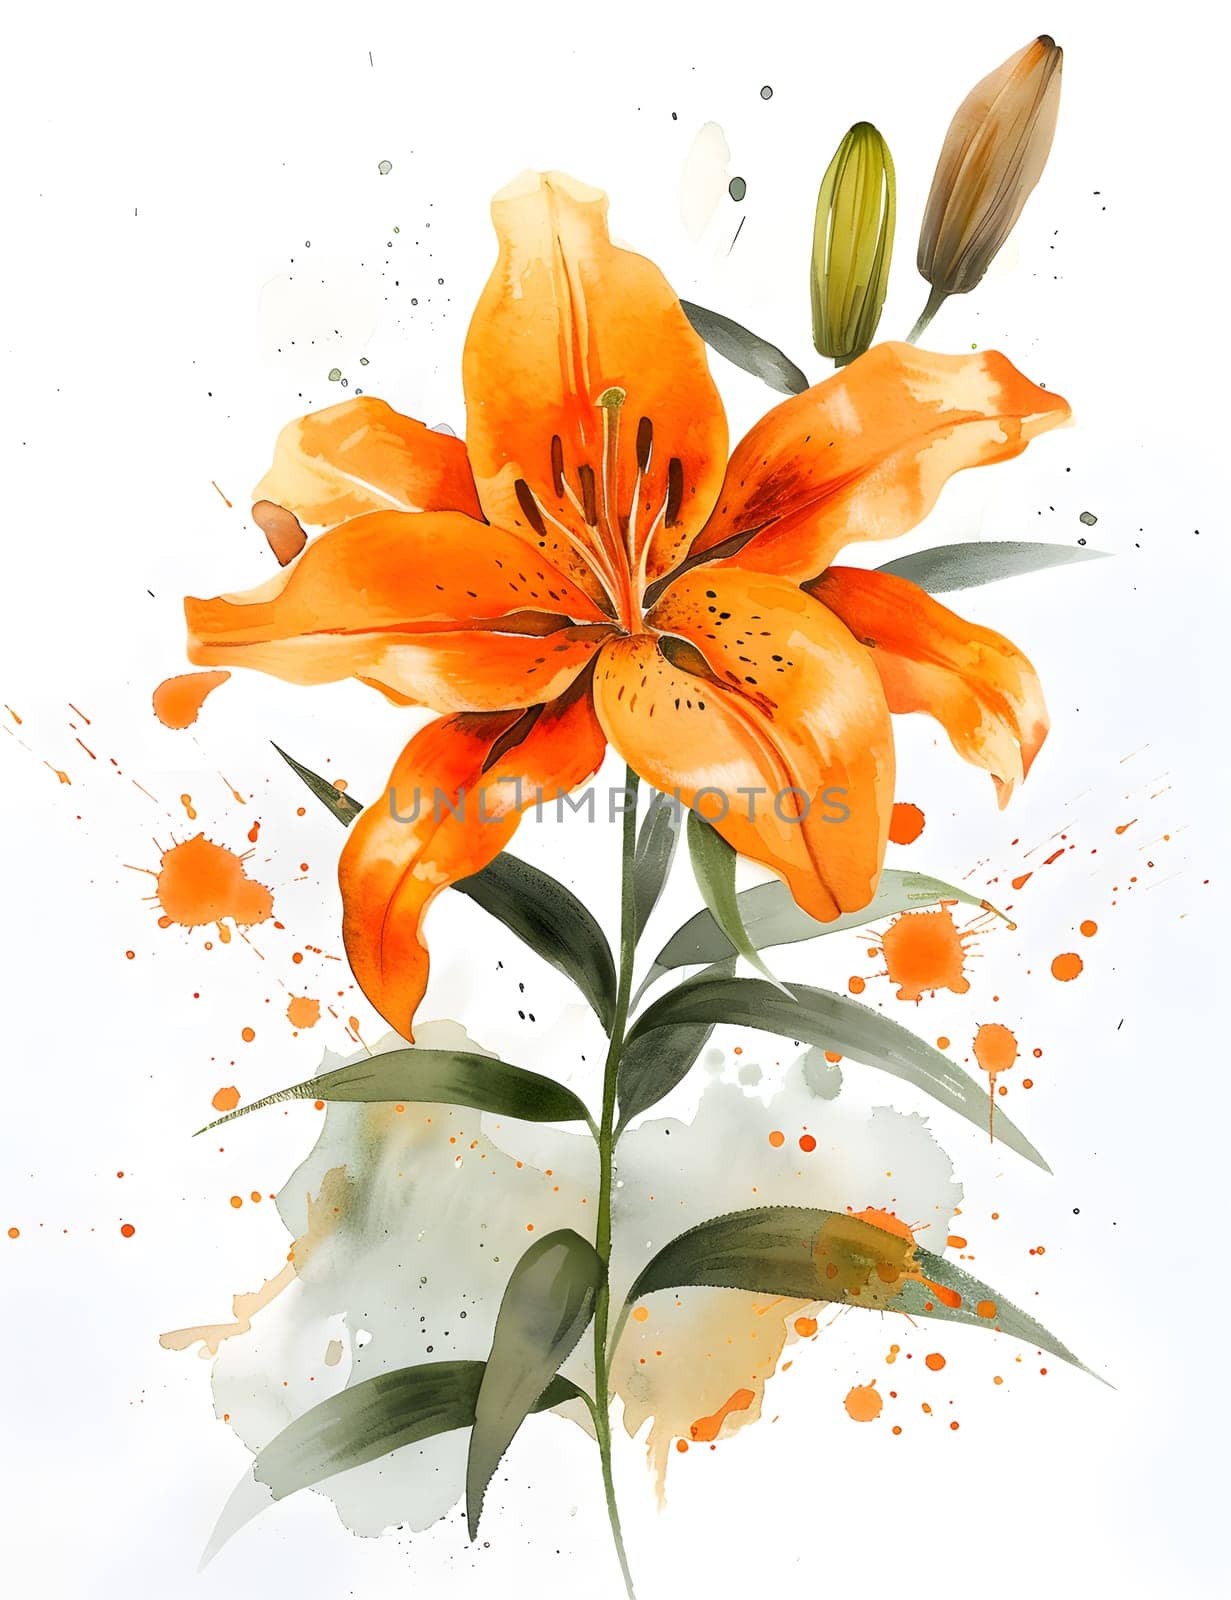 Artistic watercolor of orange lily with green leaves on white background by Nadtochiy